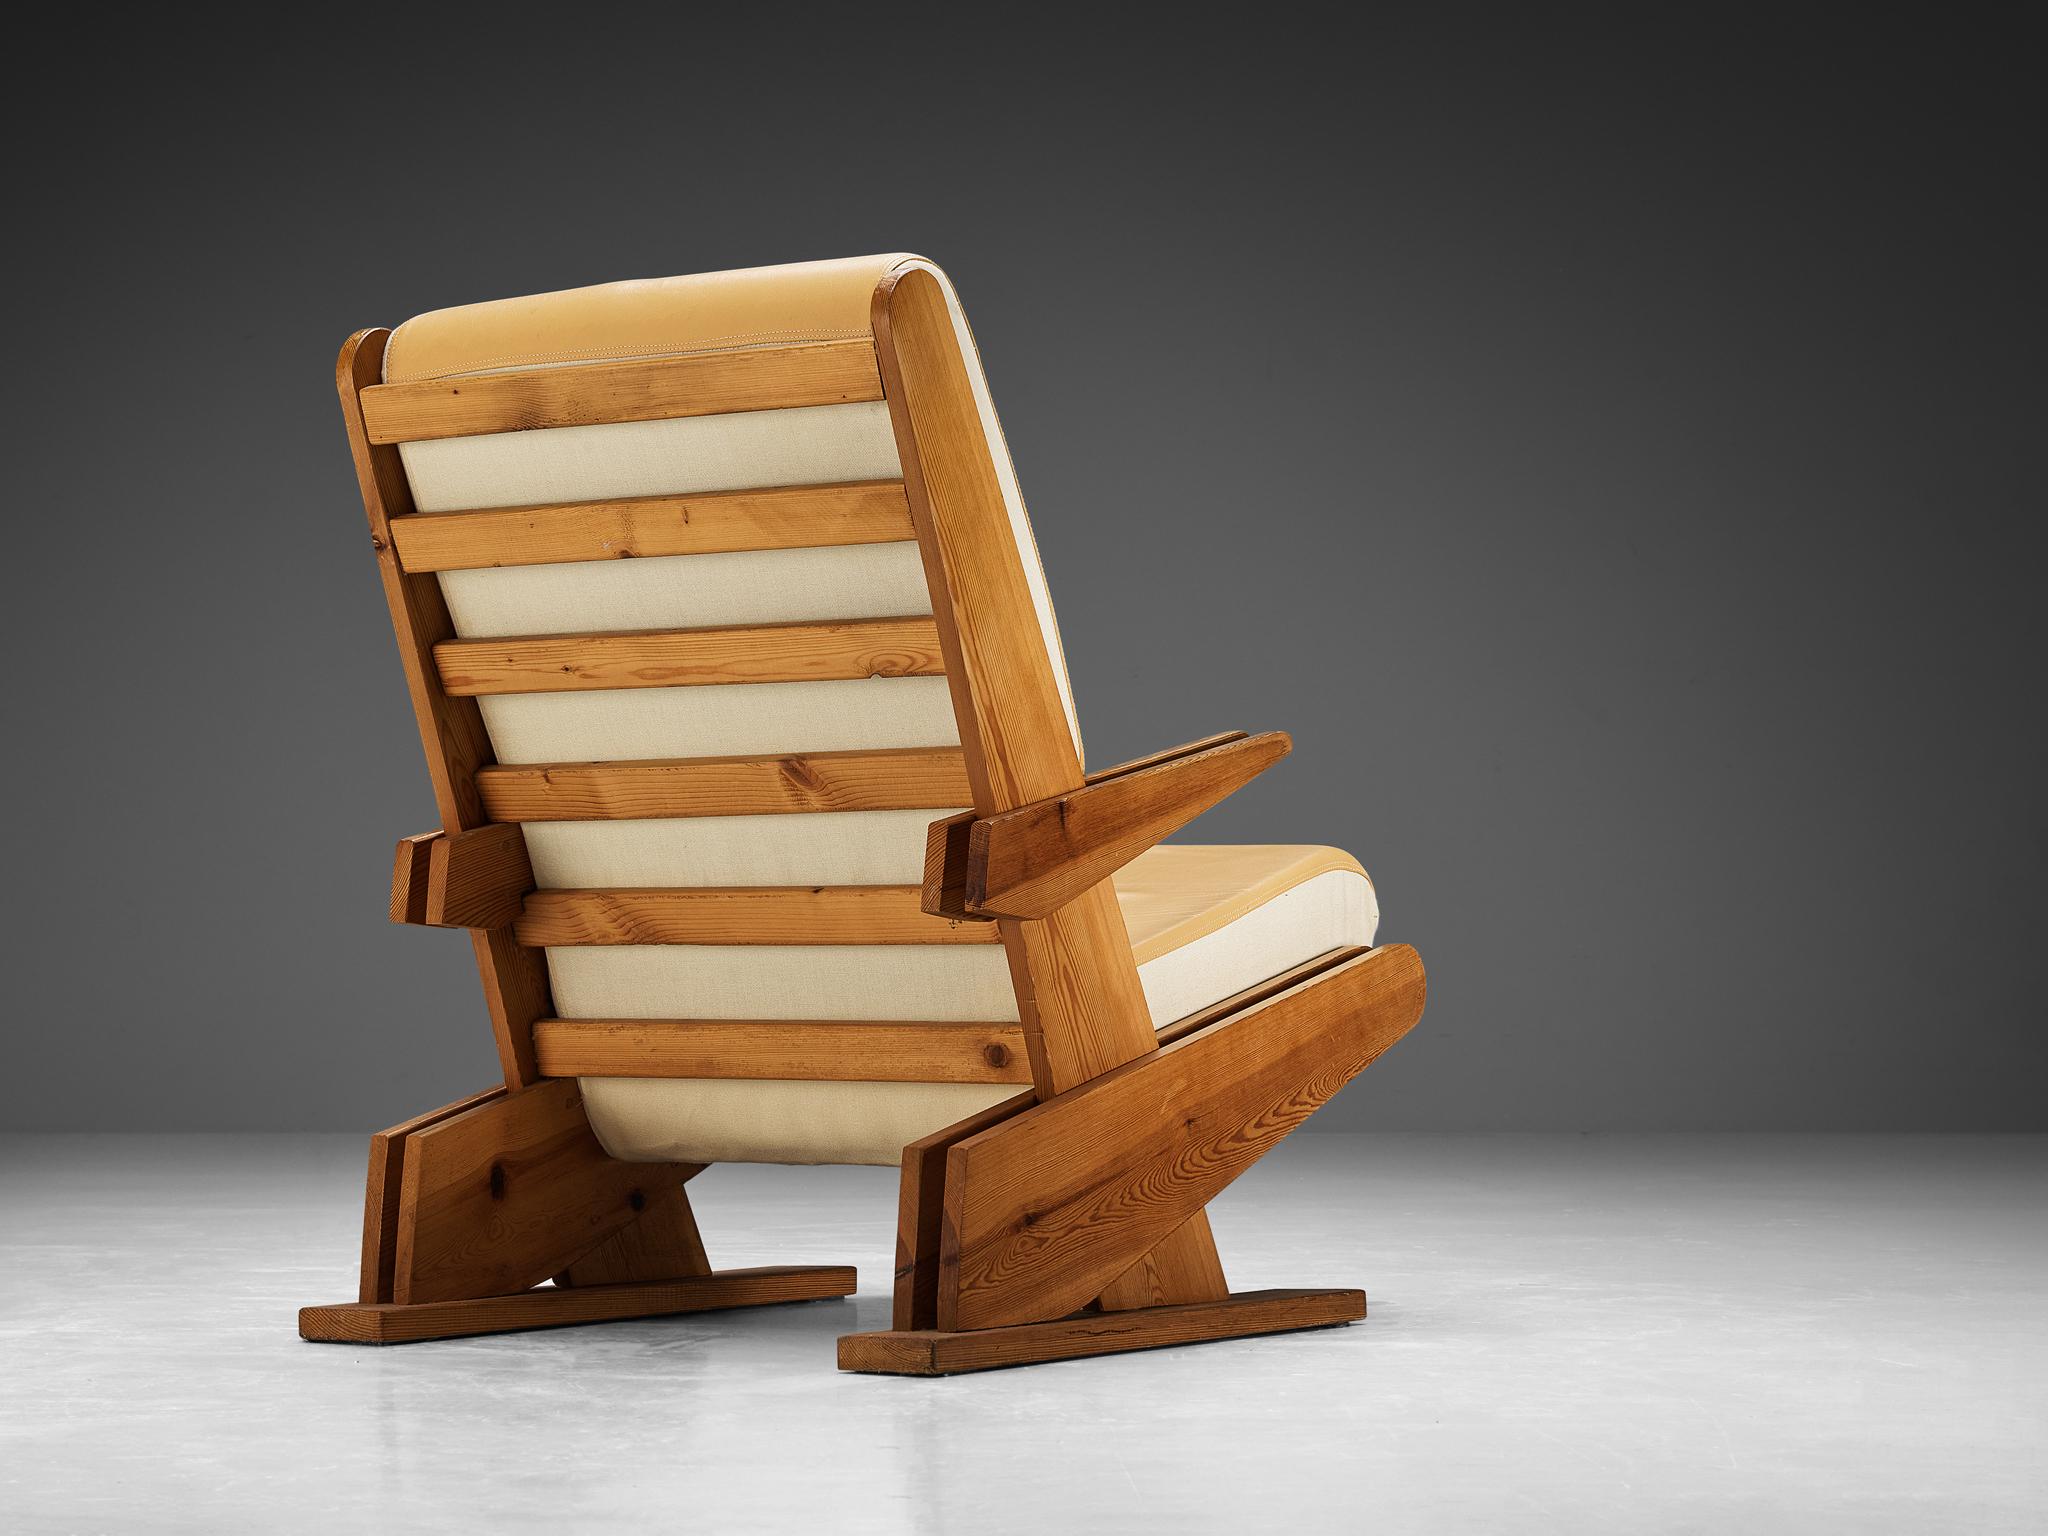 Lounge chair, pine, faux leather, fabric, Europe, 1970s

This distinctive chair reflects the stylistic traits of Brutalism. The wooden framework in pine is pure and clear in its execution with sharp, angular lines forming its design. The angular